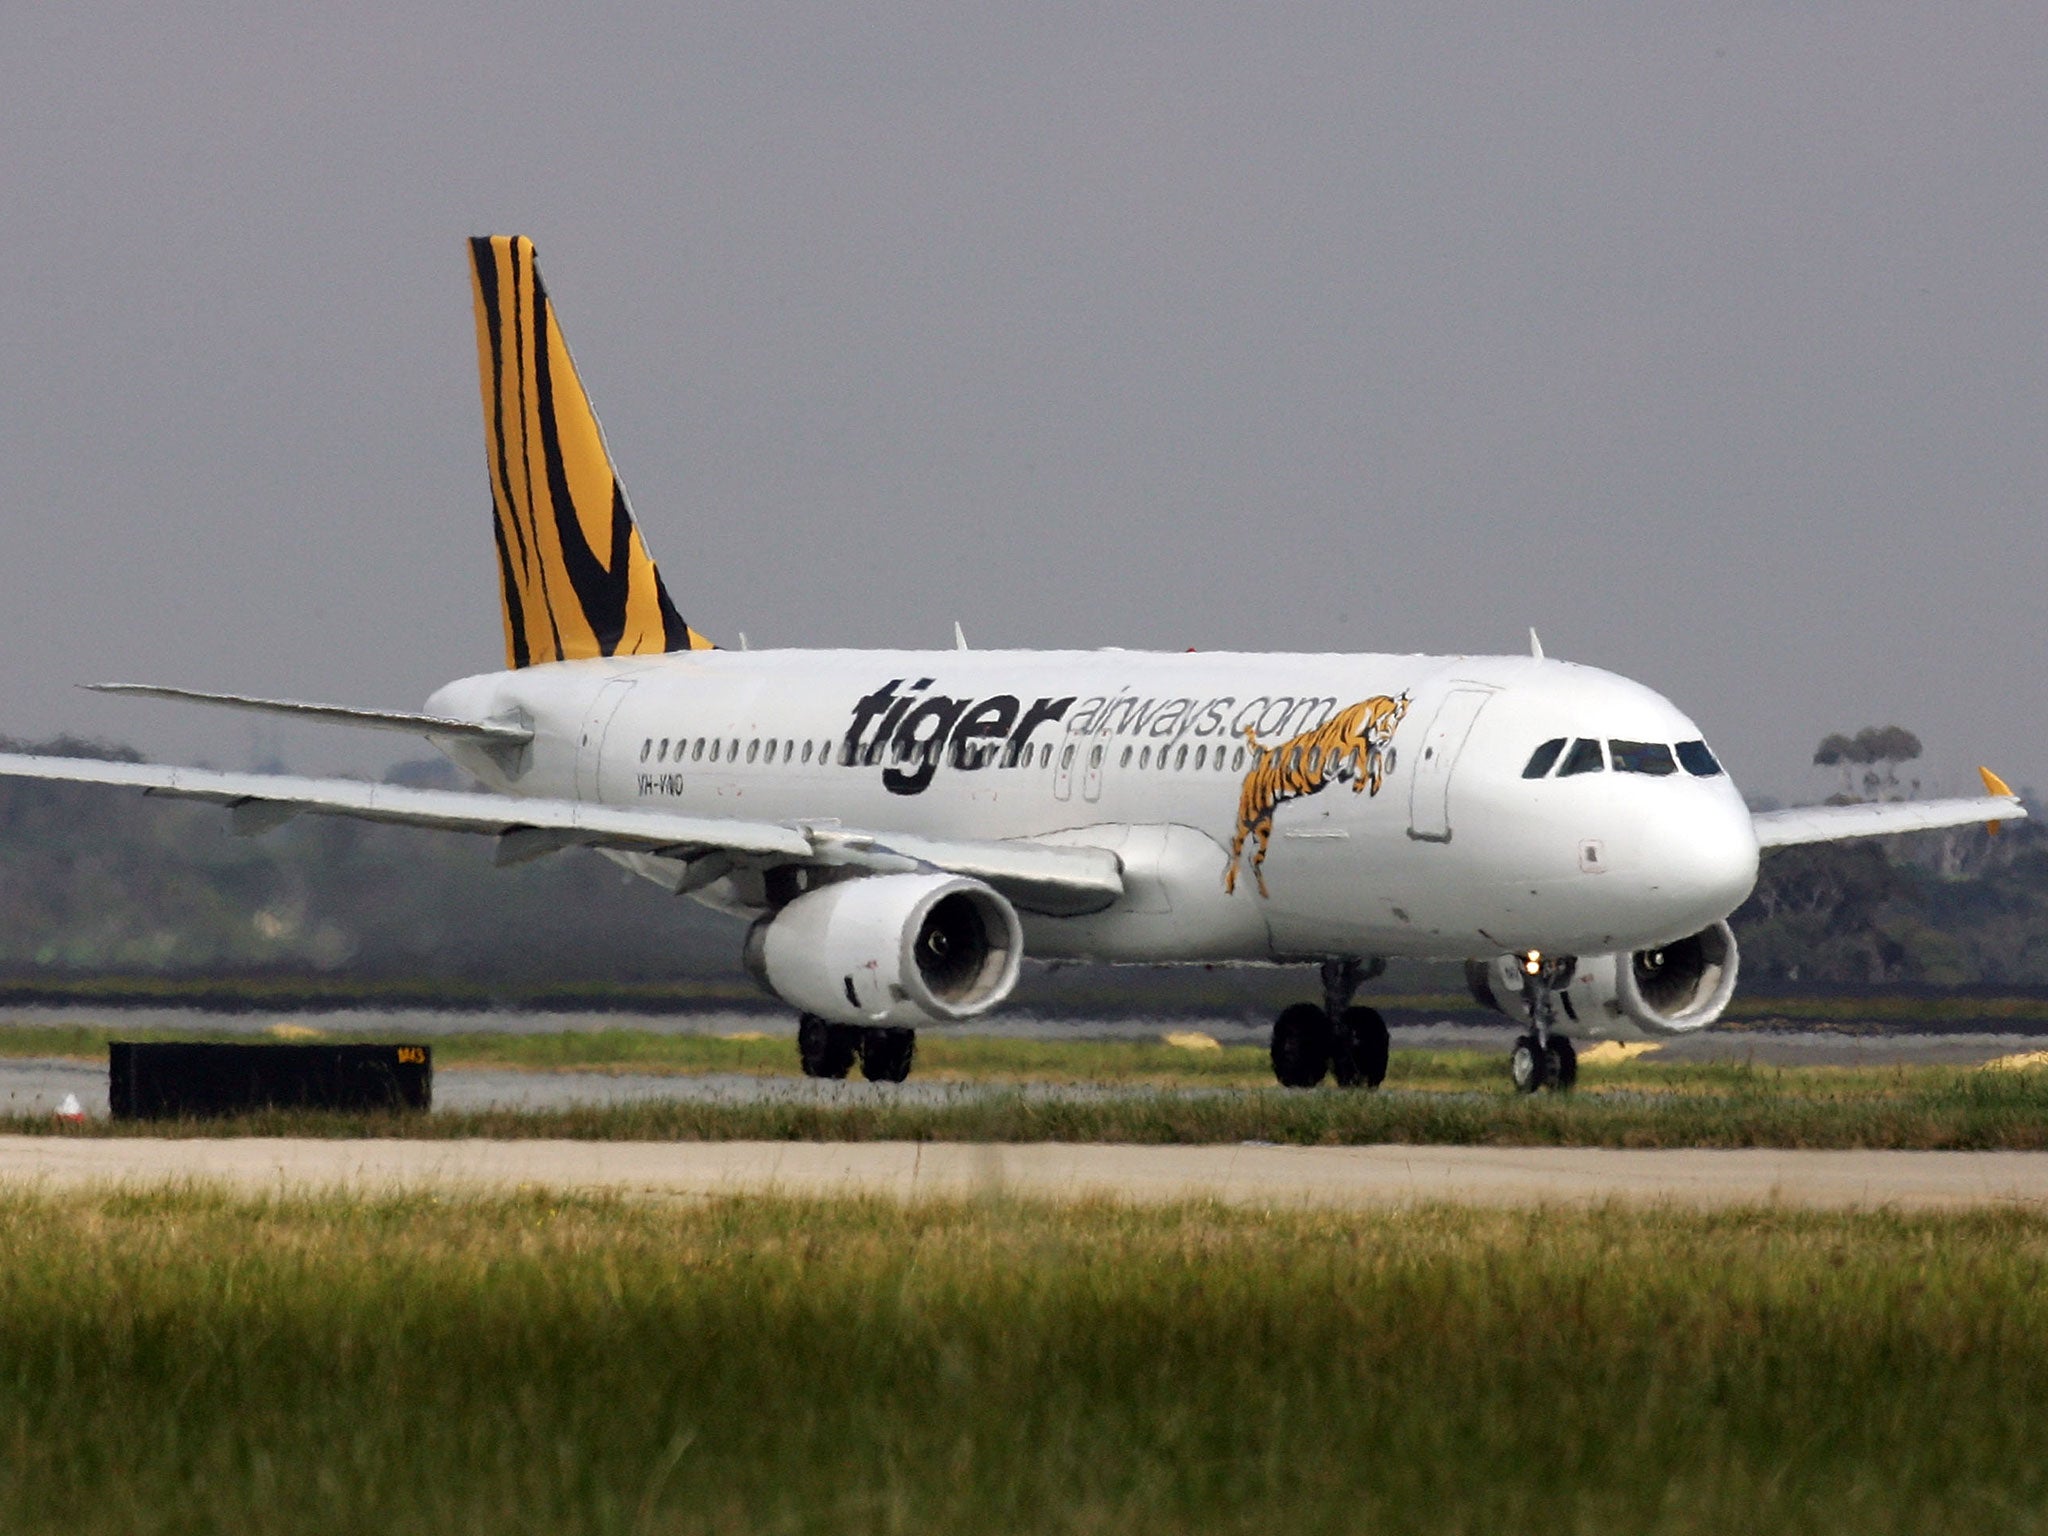 A Tiger Airways flight similar to the aircraft from which an Australian man was removed